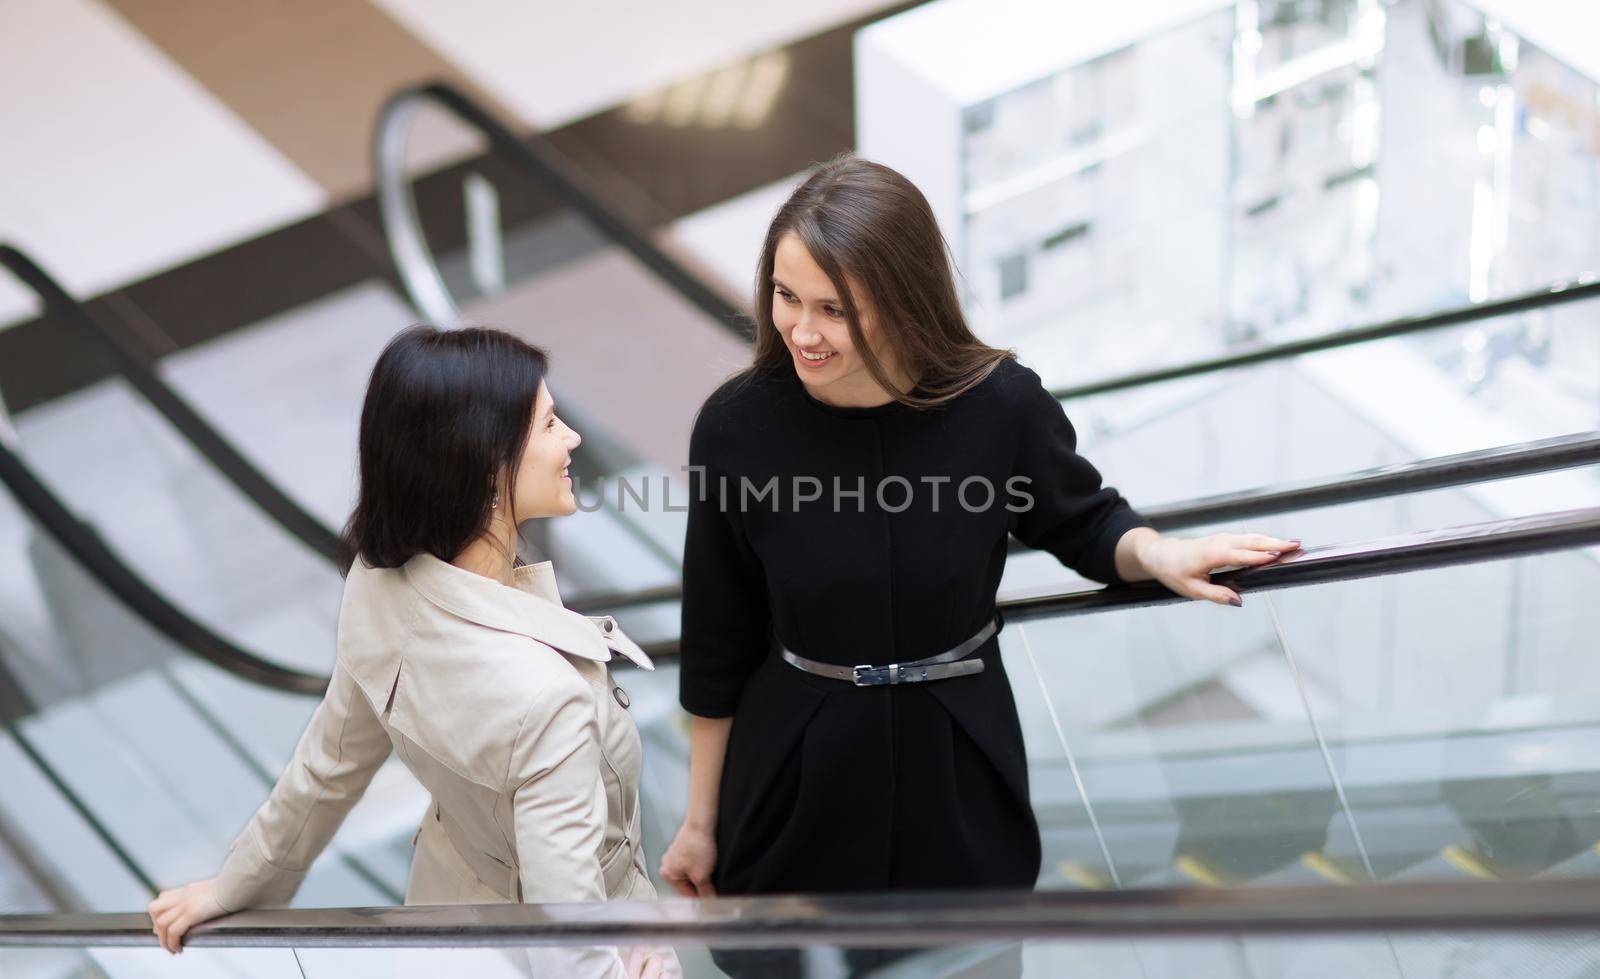 manager meets the client in the foyer of the modern office. The photo has an empty space for your text